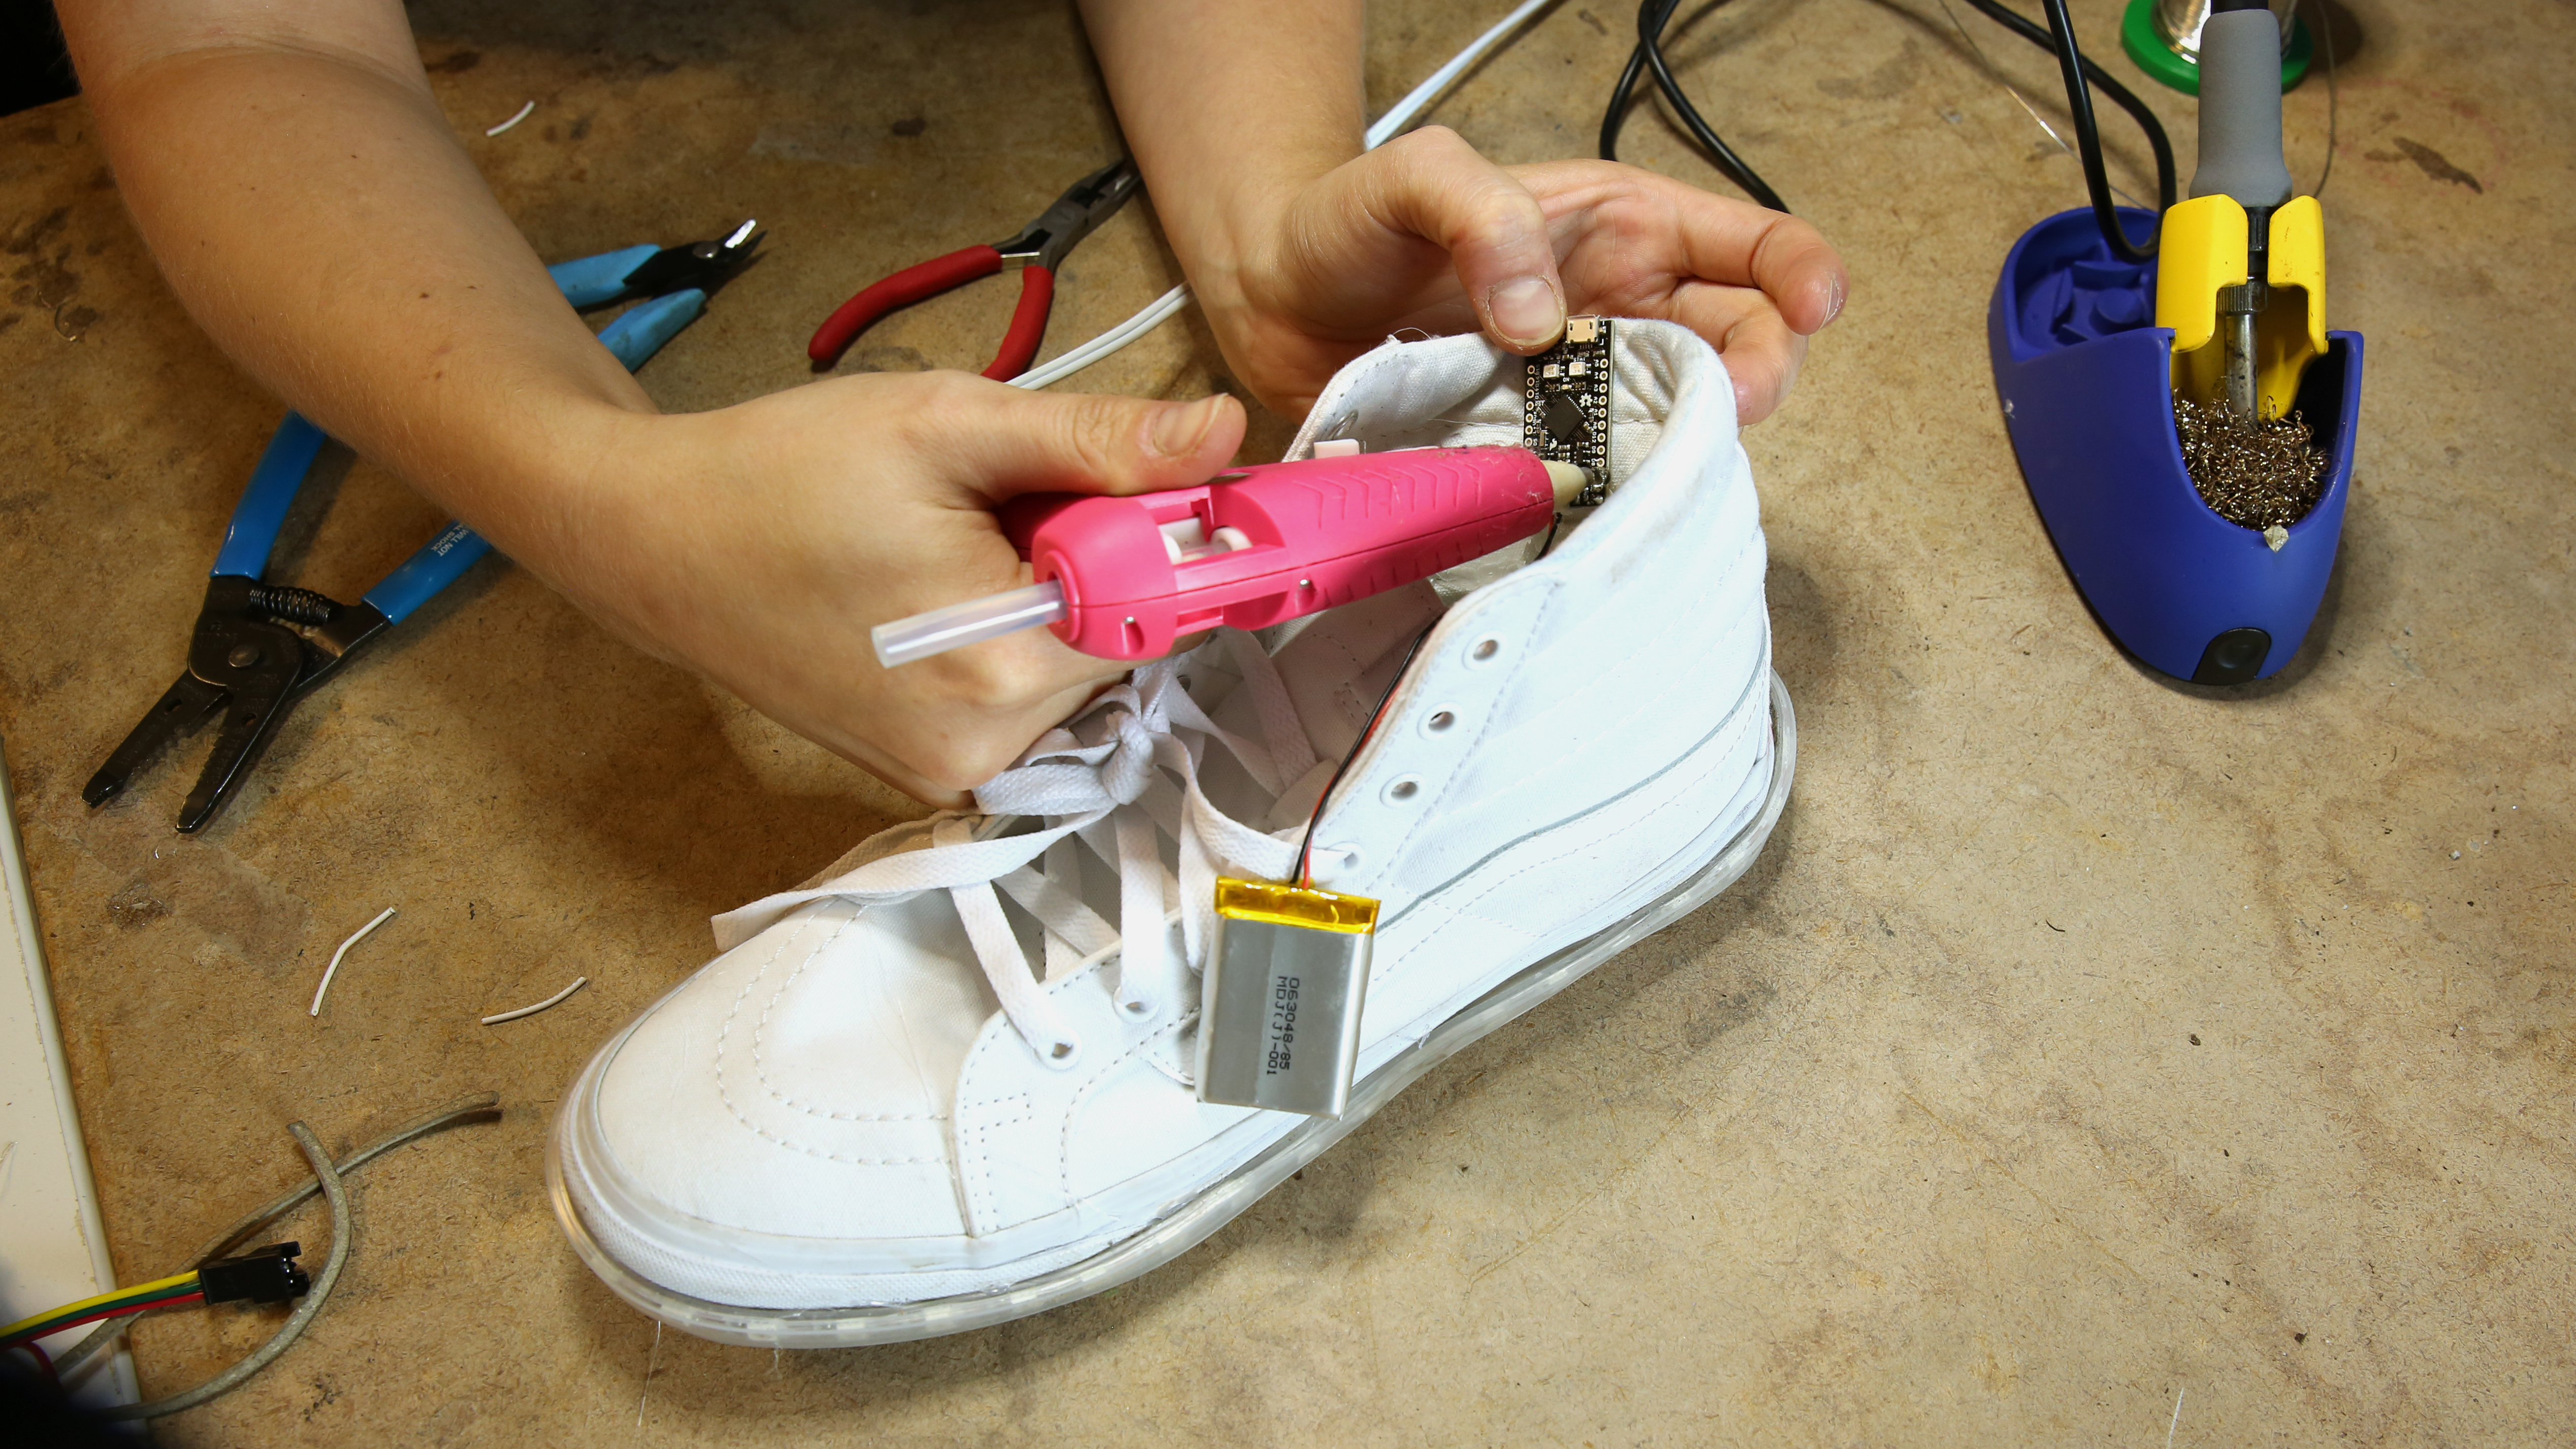 DIY Light-Up Shoes - SparkFun Learn